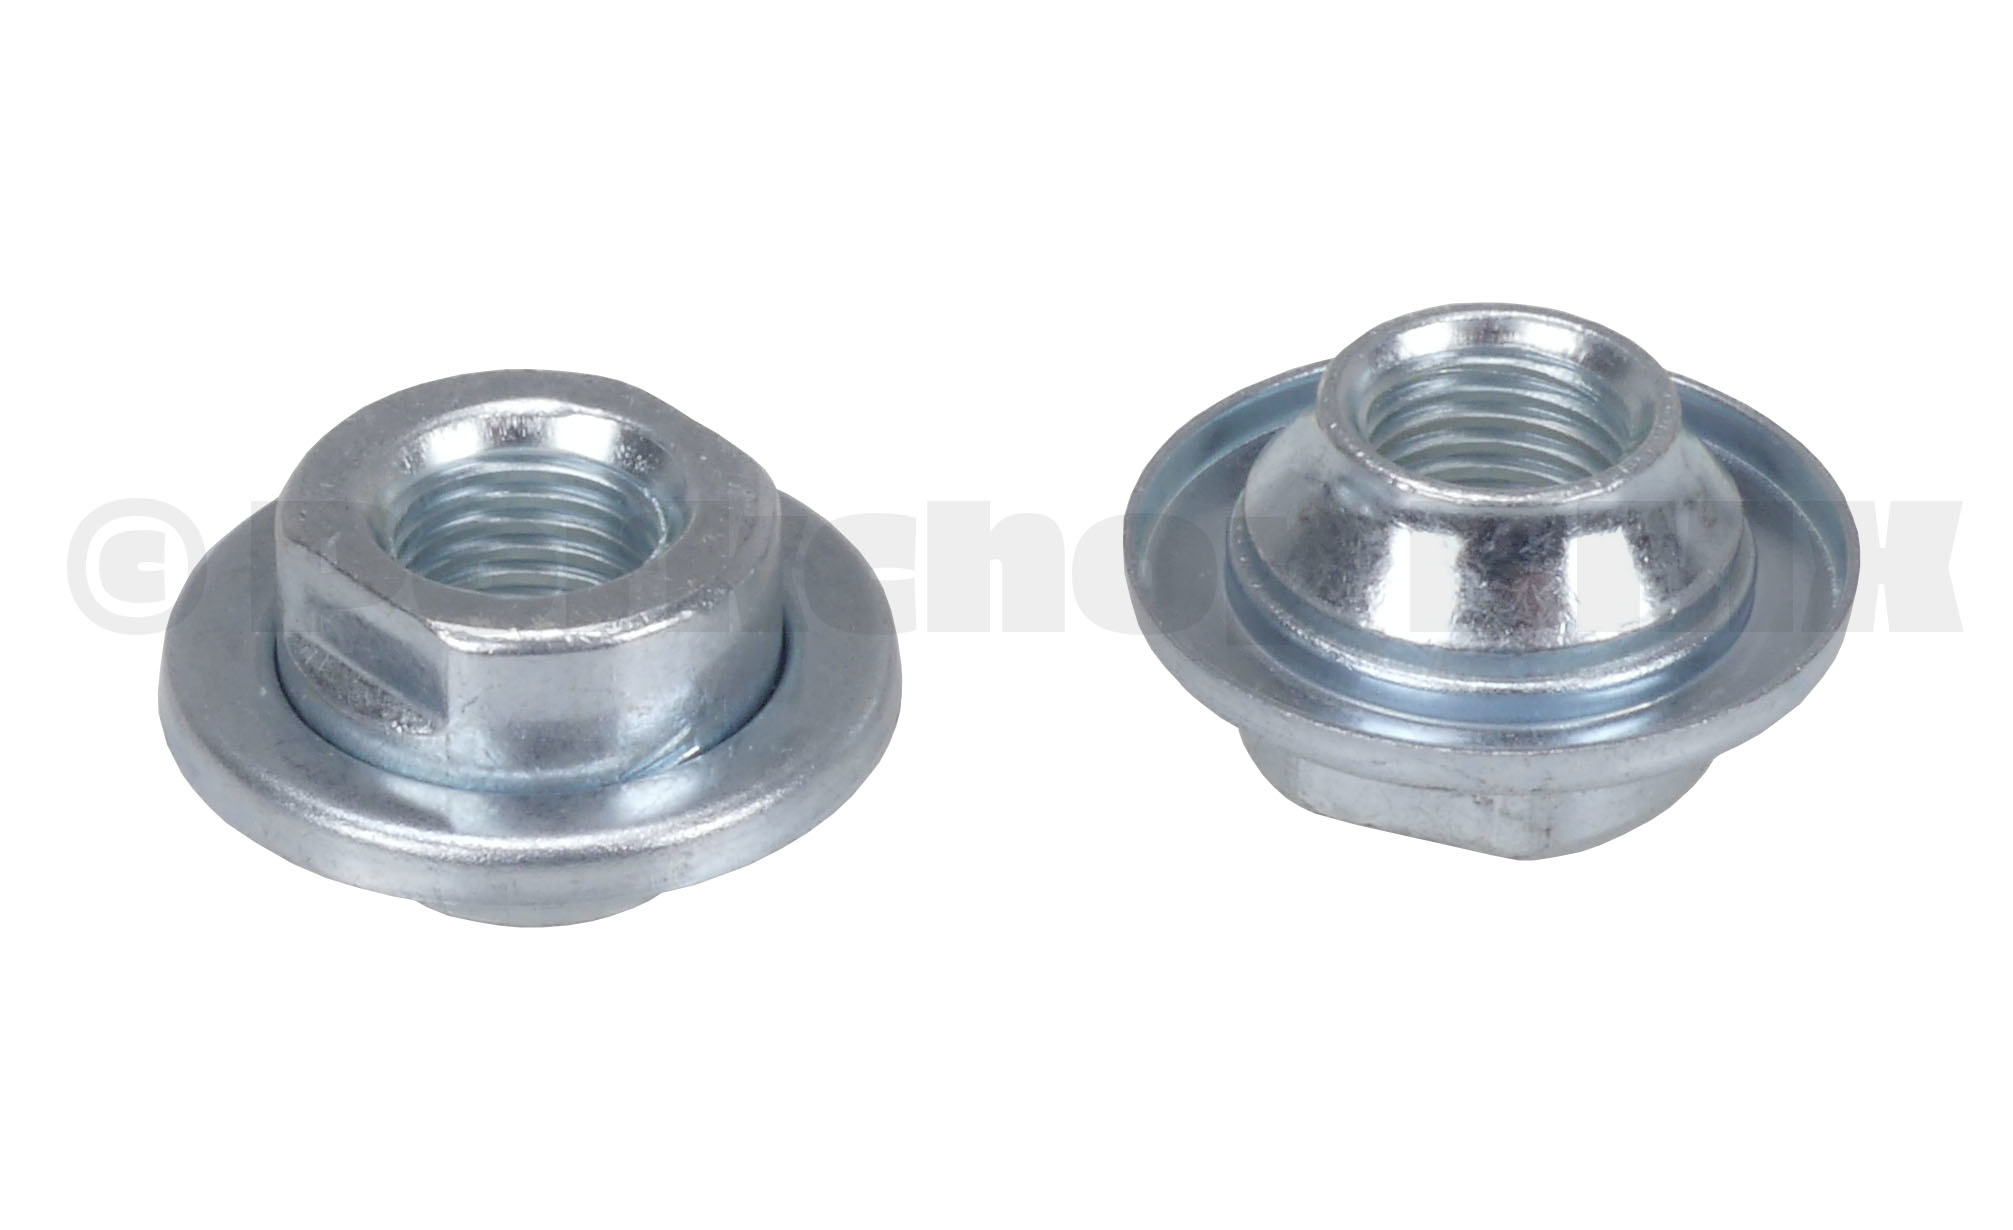 Flanged BMX MTB ROAD BICYCLE axle nuts 3/8" X 26T  A PAIR 1 SET 